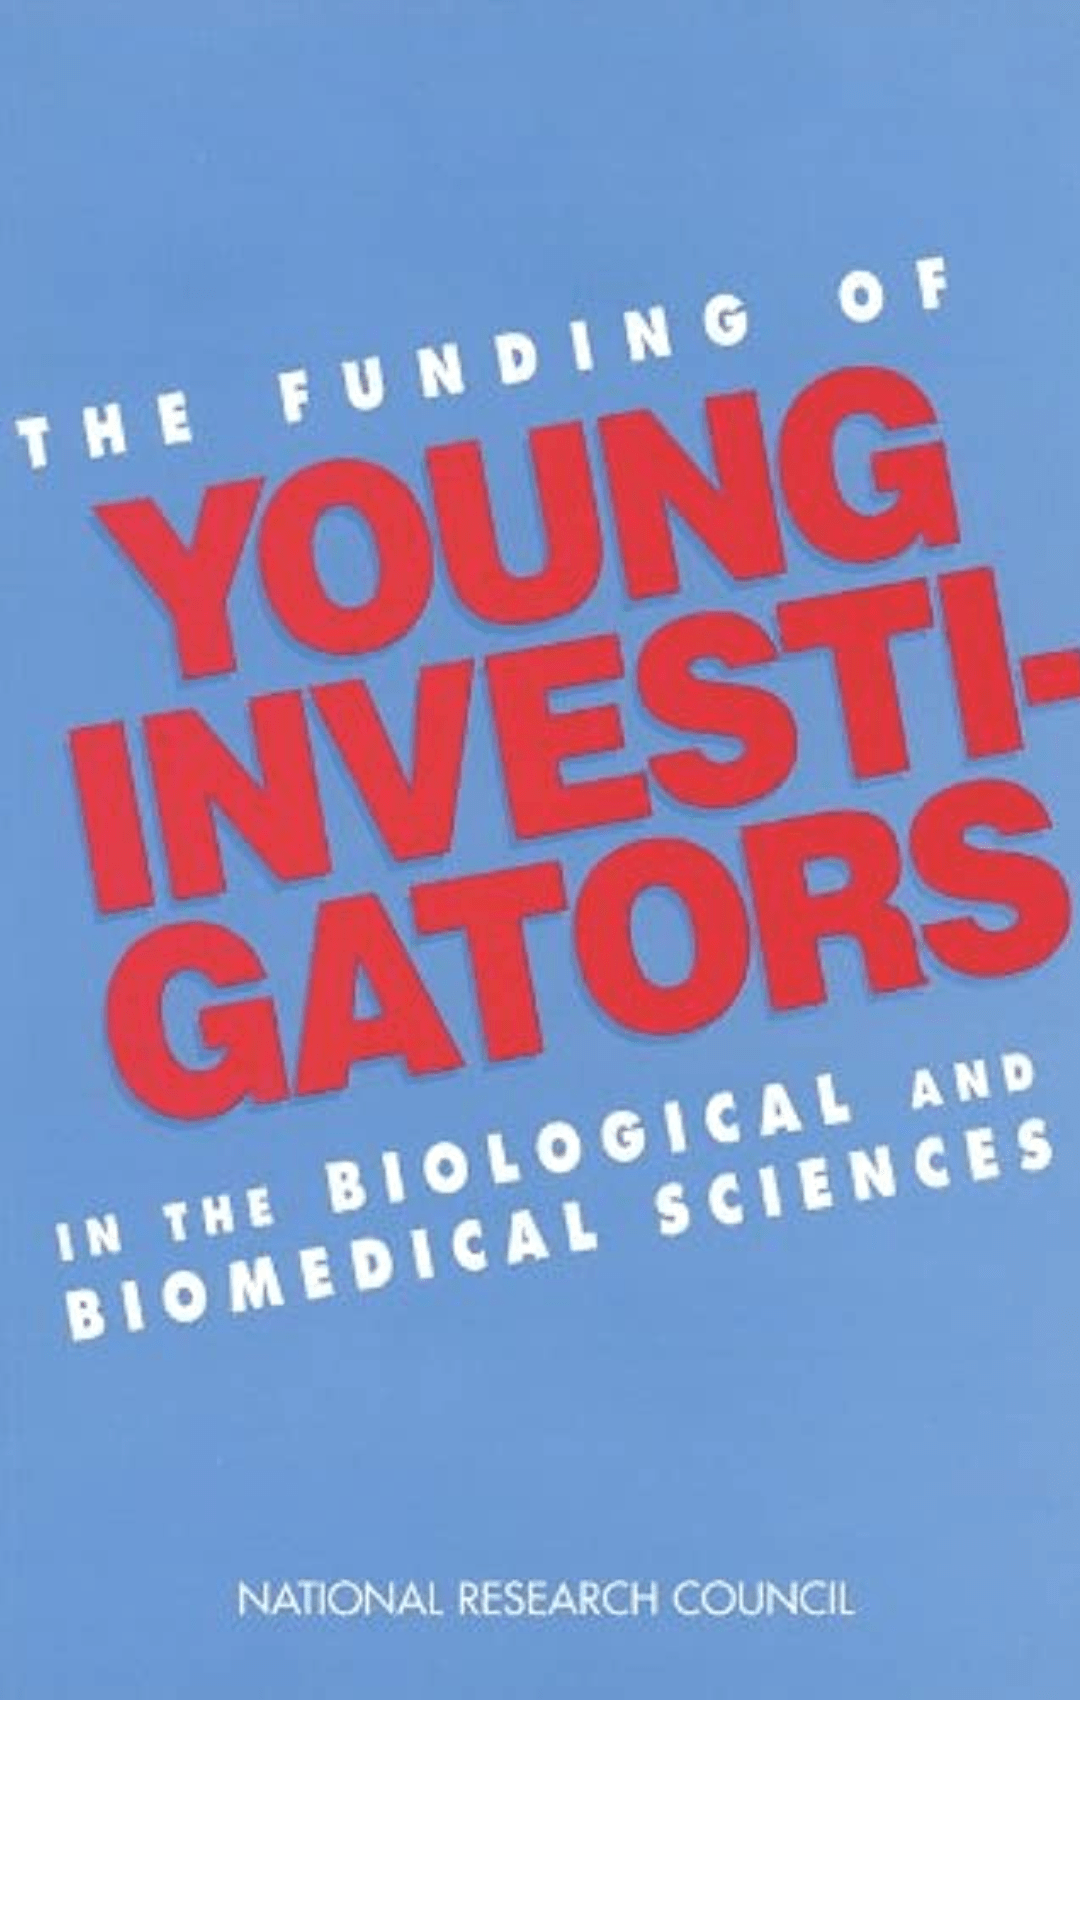 The Funding of Young Investigators in the Biological and Biomedical Sciences